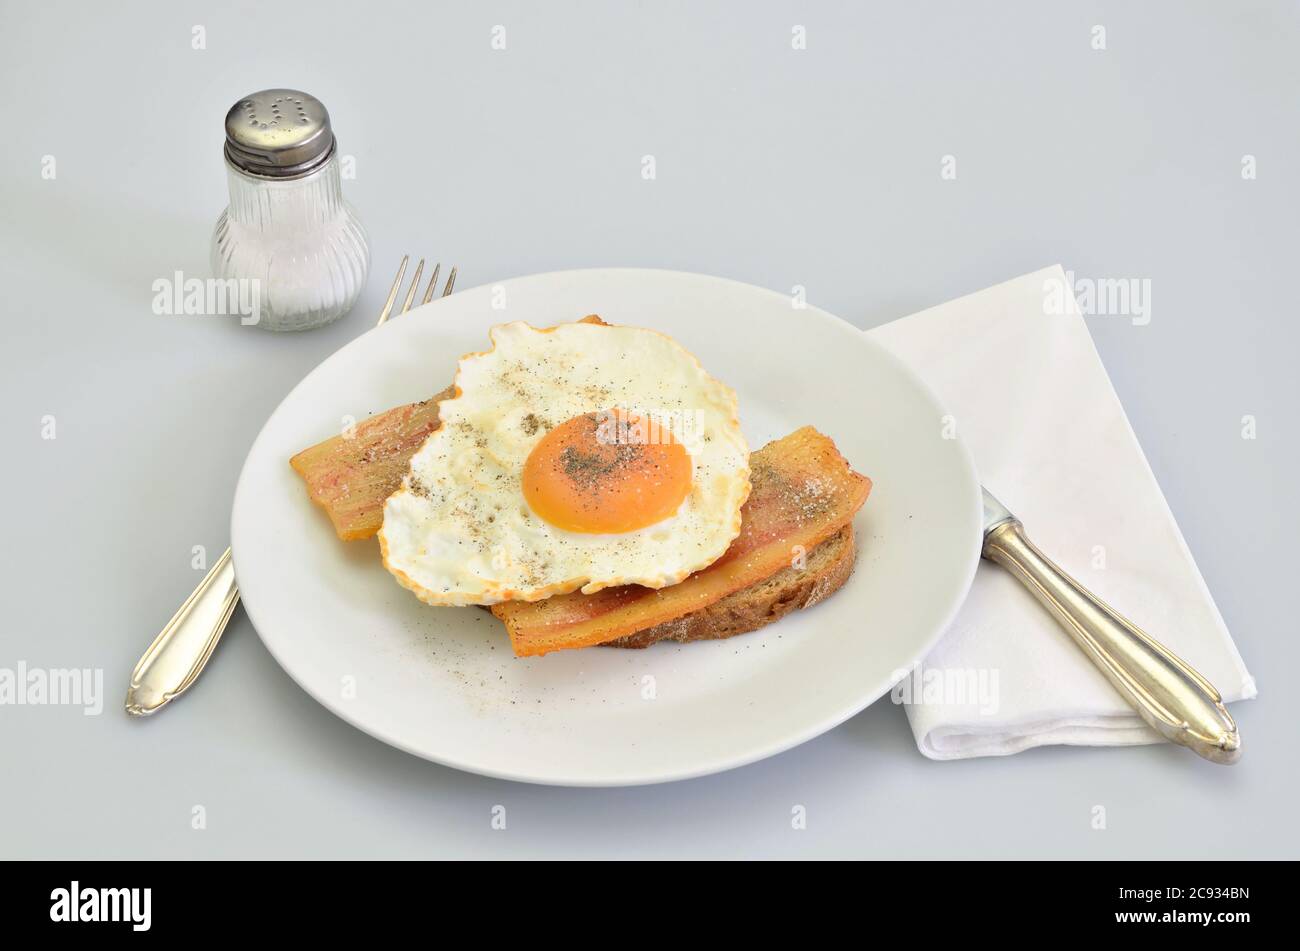 sandwich with bacon and fried egg with salt and pepper on white plate, closeup, isolated on white background Stock Photo